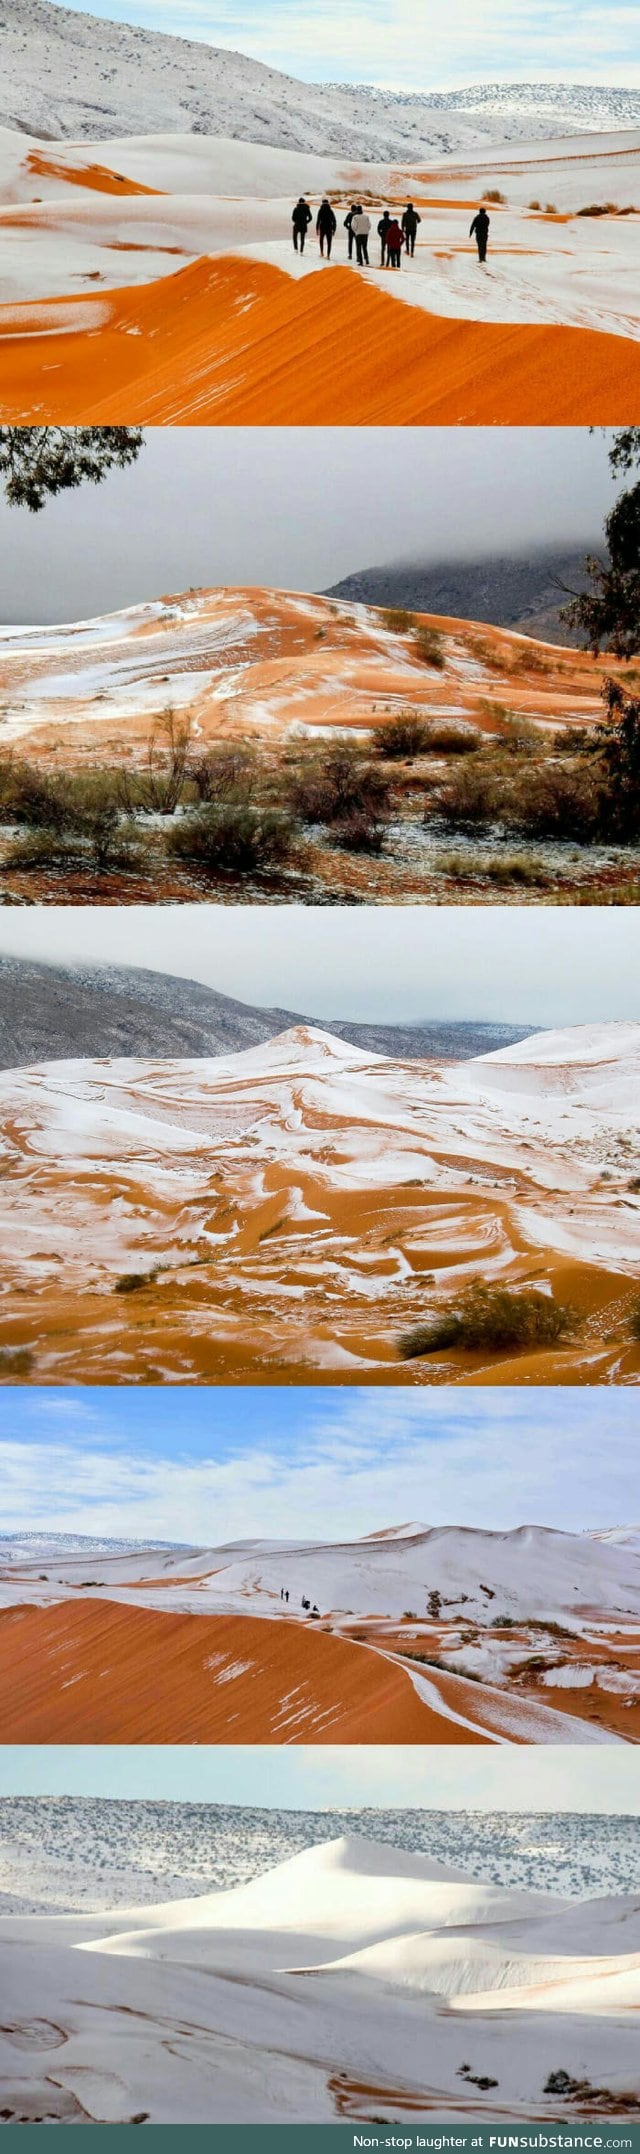 Snow in Sahara. Yup. We definitely need some of that global warming.